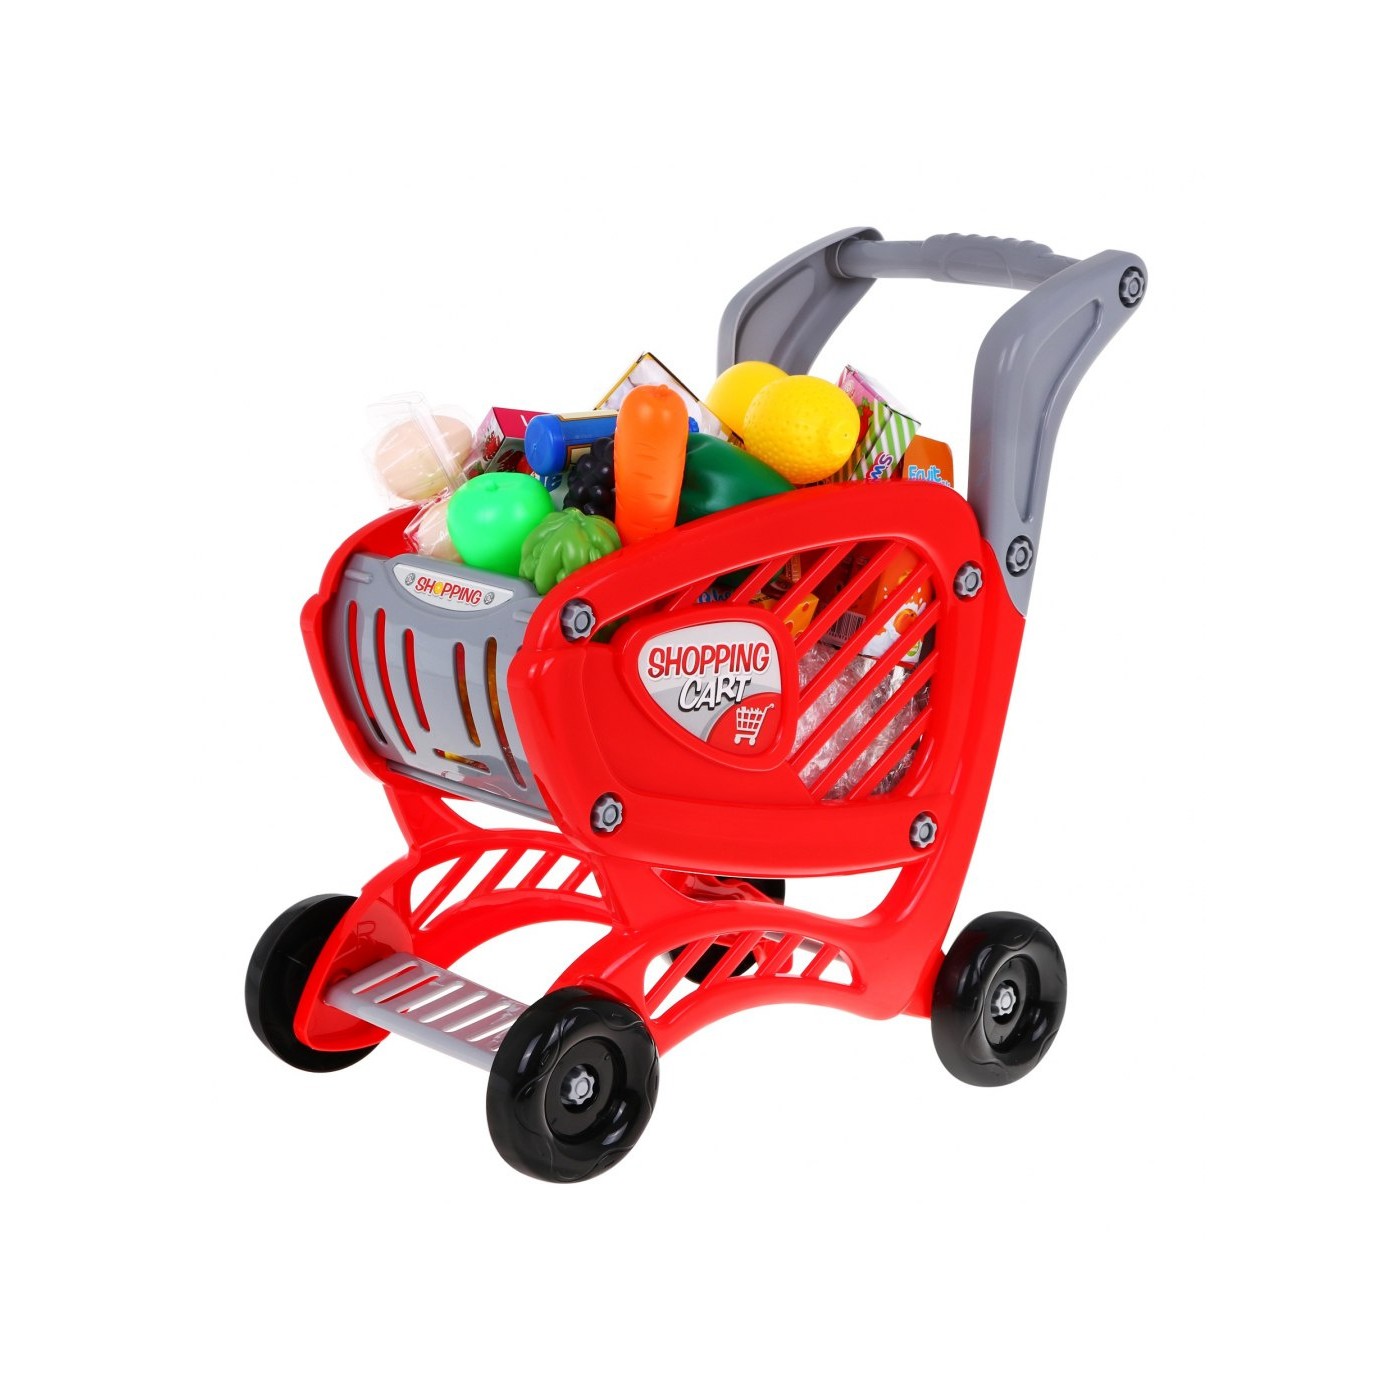 Large Red Shopping Cart Accessory Kit